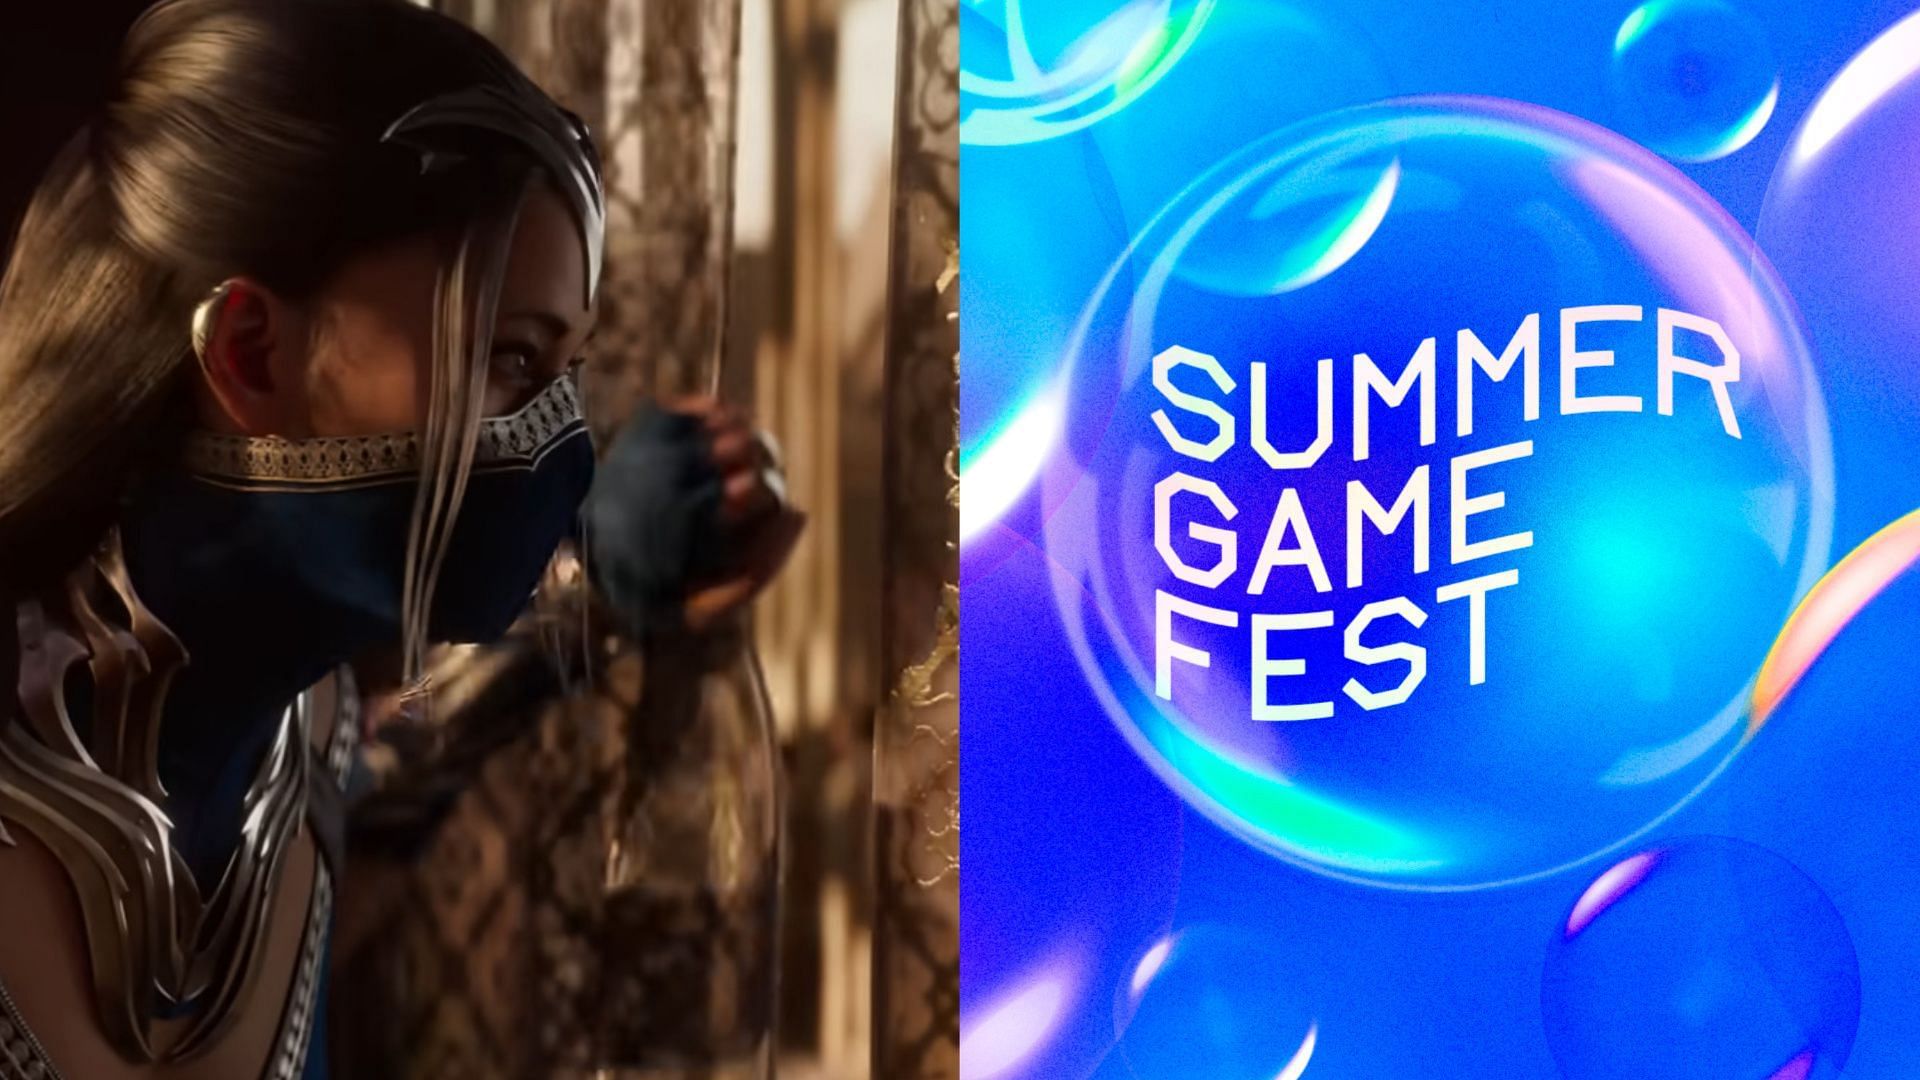 Summer Game Fest on X: JUST TWO DAYS UNTIL MORTAL KOMBAT 1 GAMEPLAY  REVEAL. Do not miss this moment at #SummerGameFest on Thursday, when Ed  Boon takes the stage to reveal an